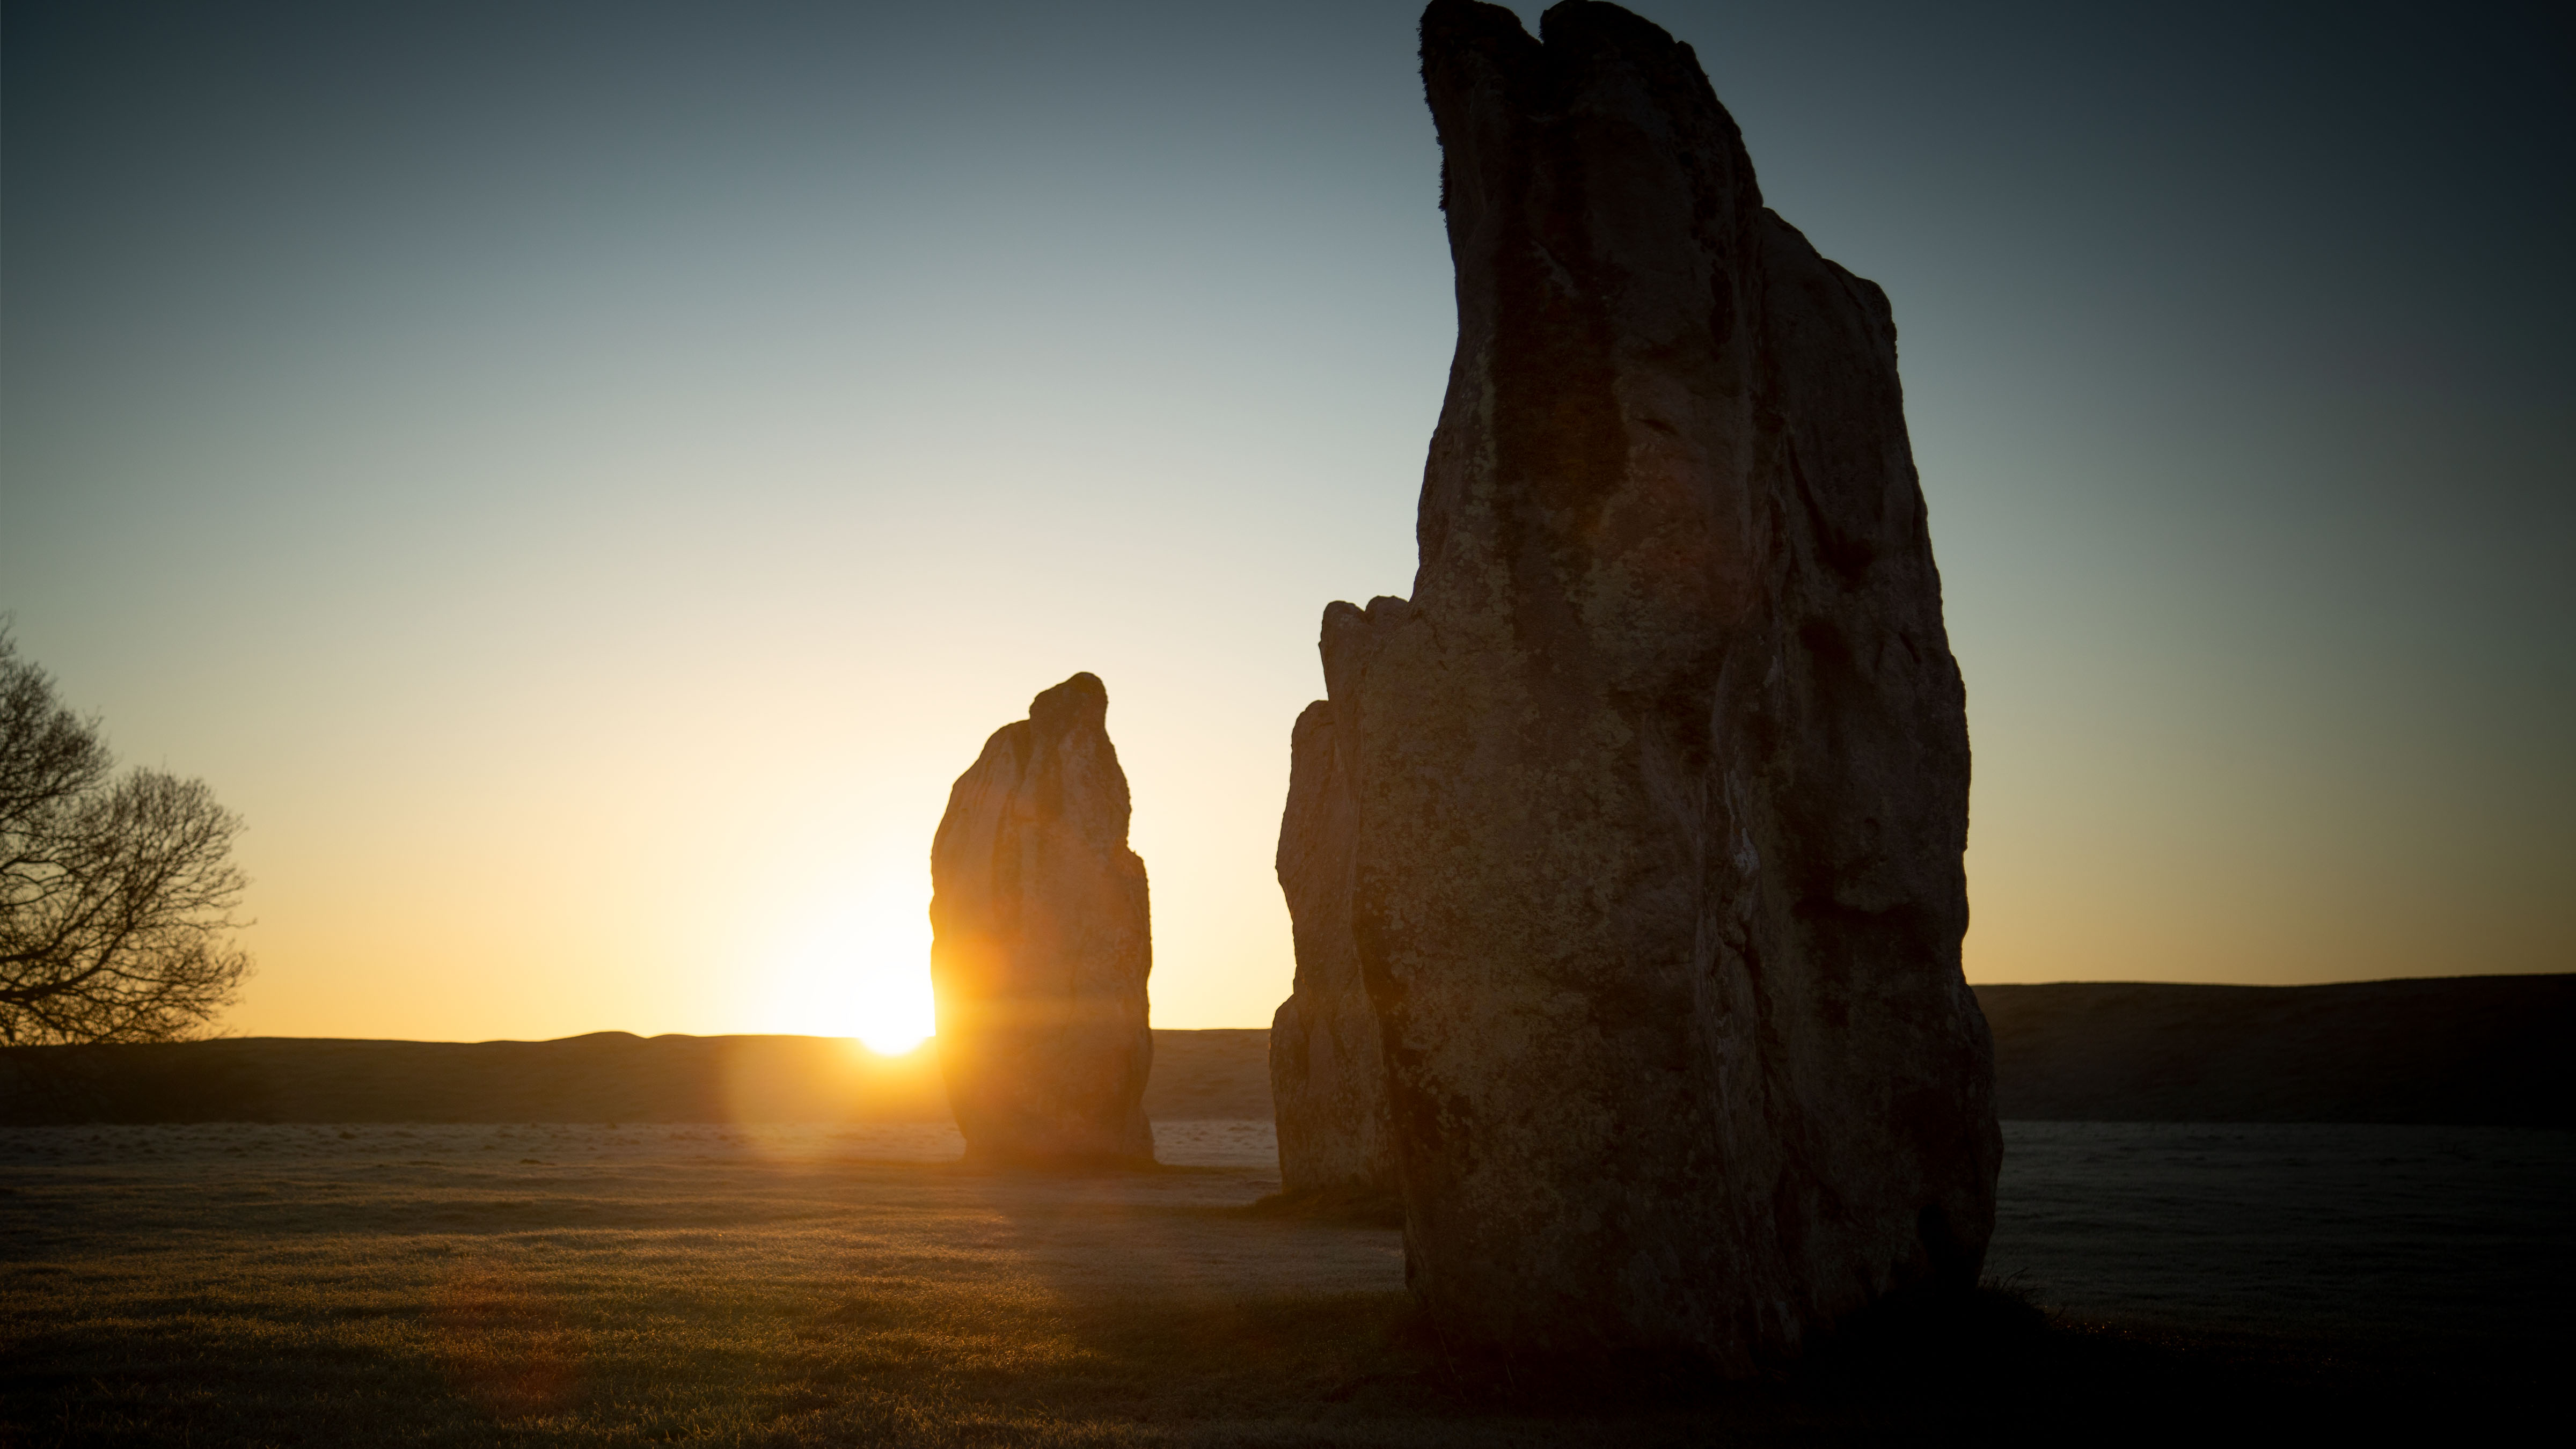 the sun rises behind a stone towards the left of the picture. taller stones stand in front in shadow